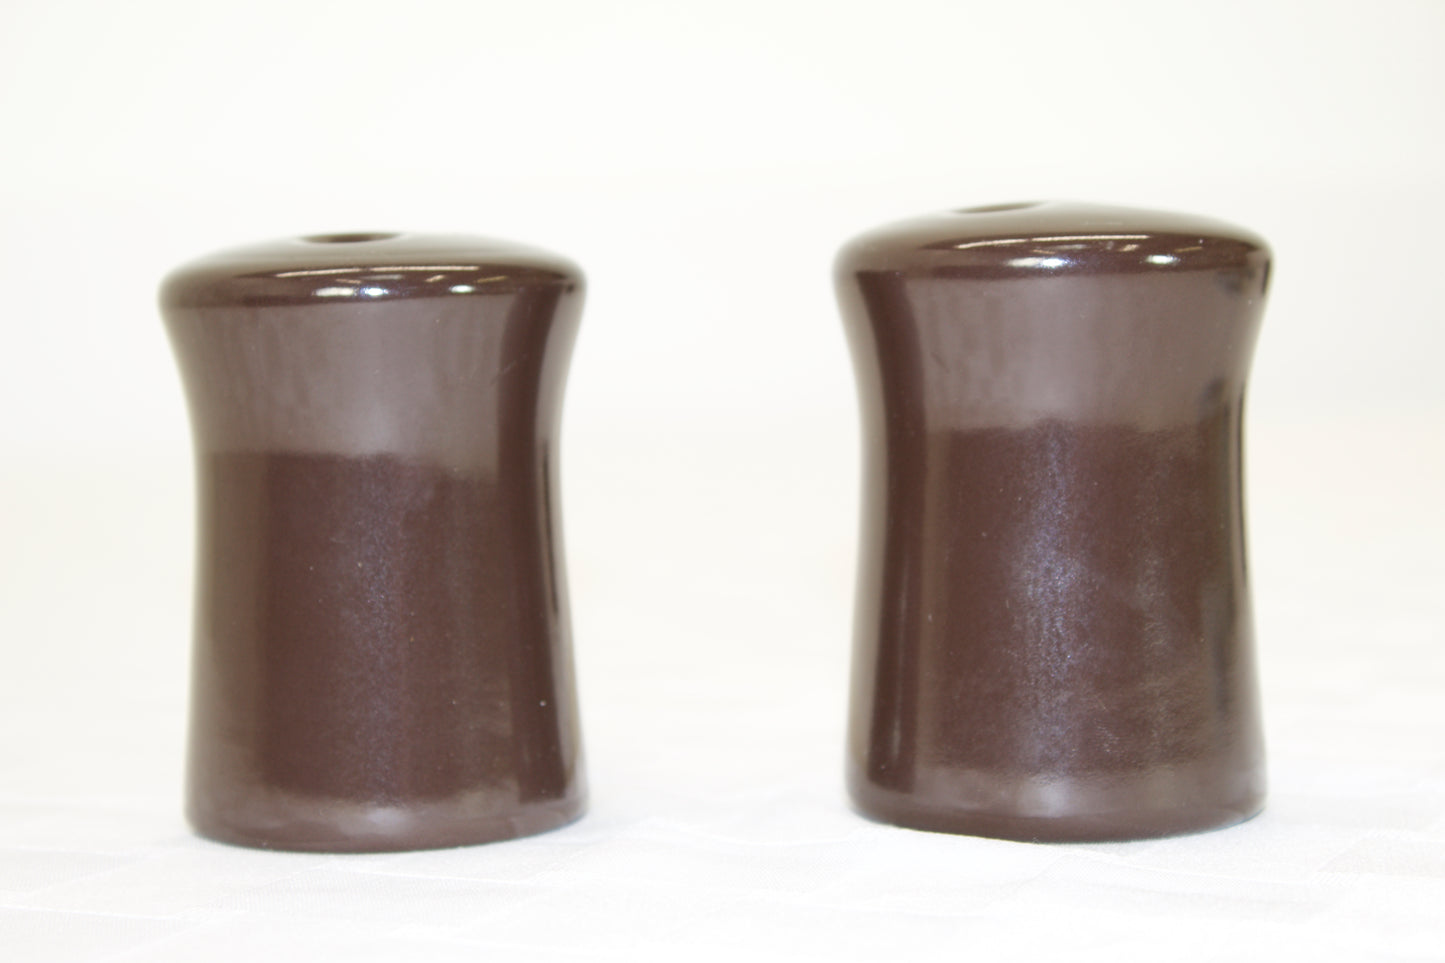 Brown stoneware salt and pepper shakers.